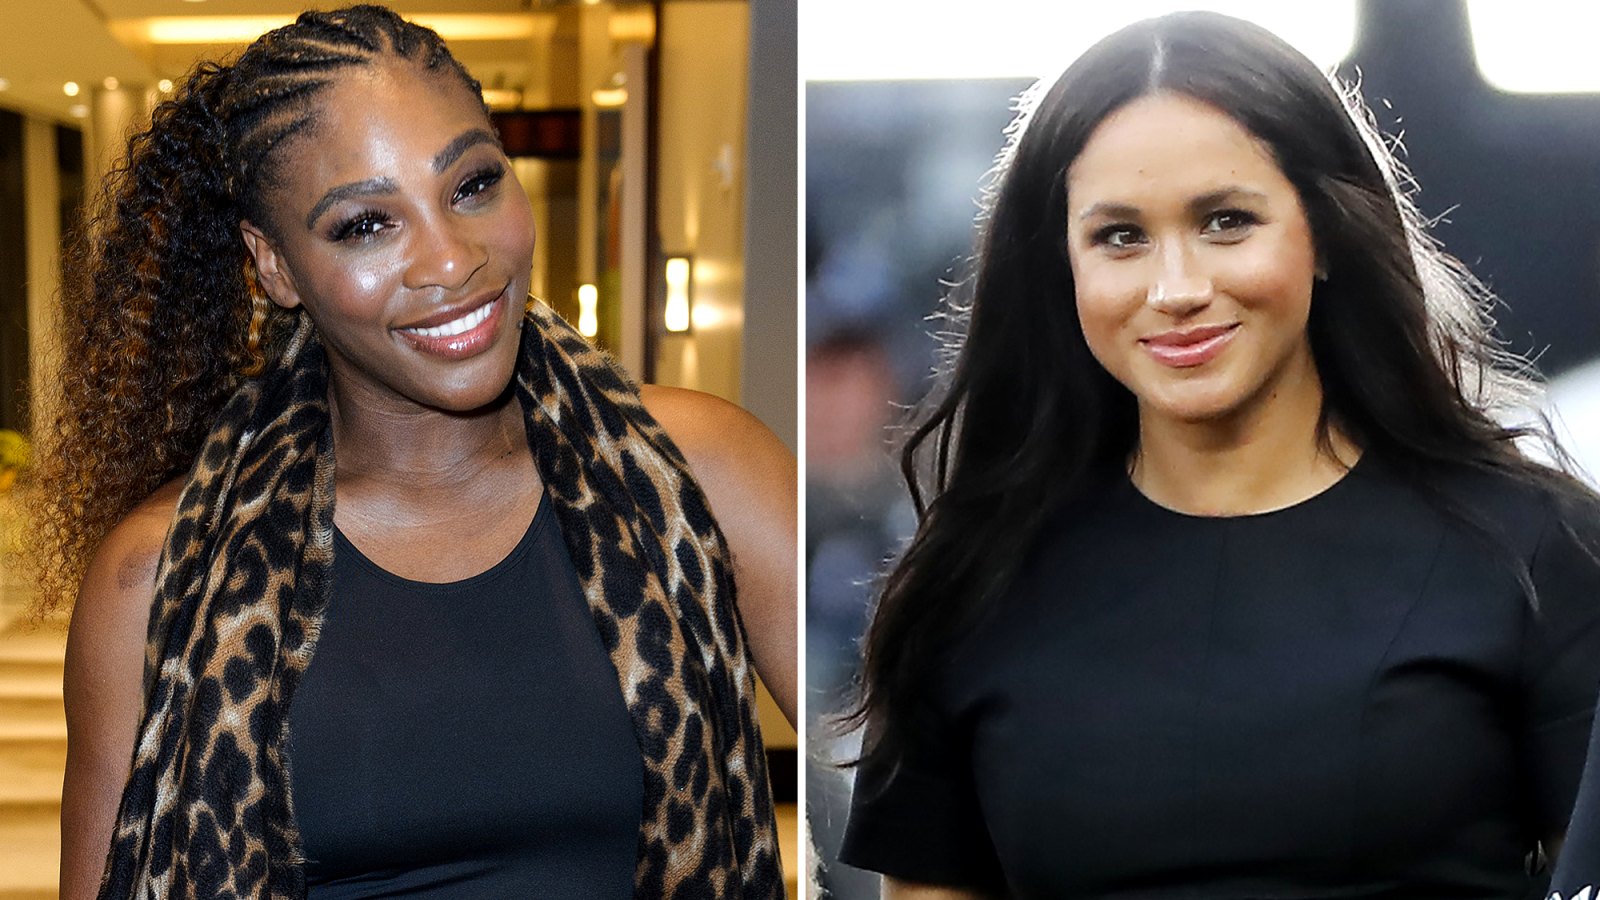 Serena Williams Won’t Give Pal Meghan Markle Parenting Advice